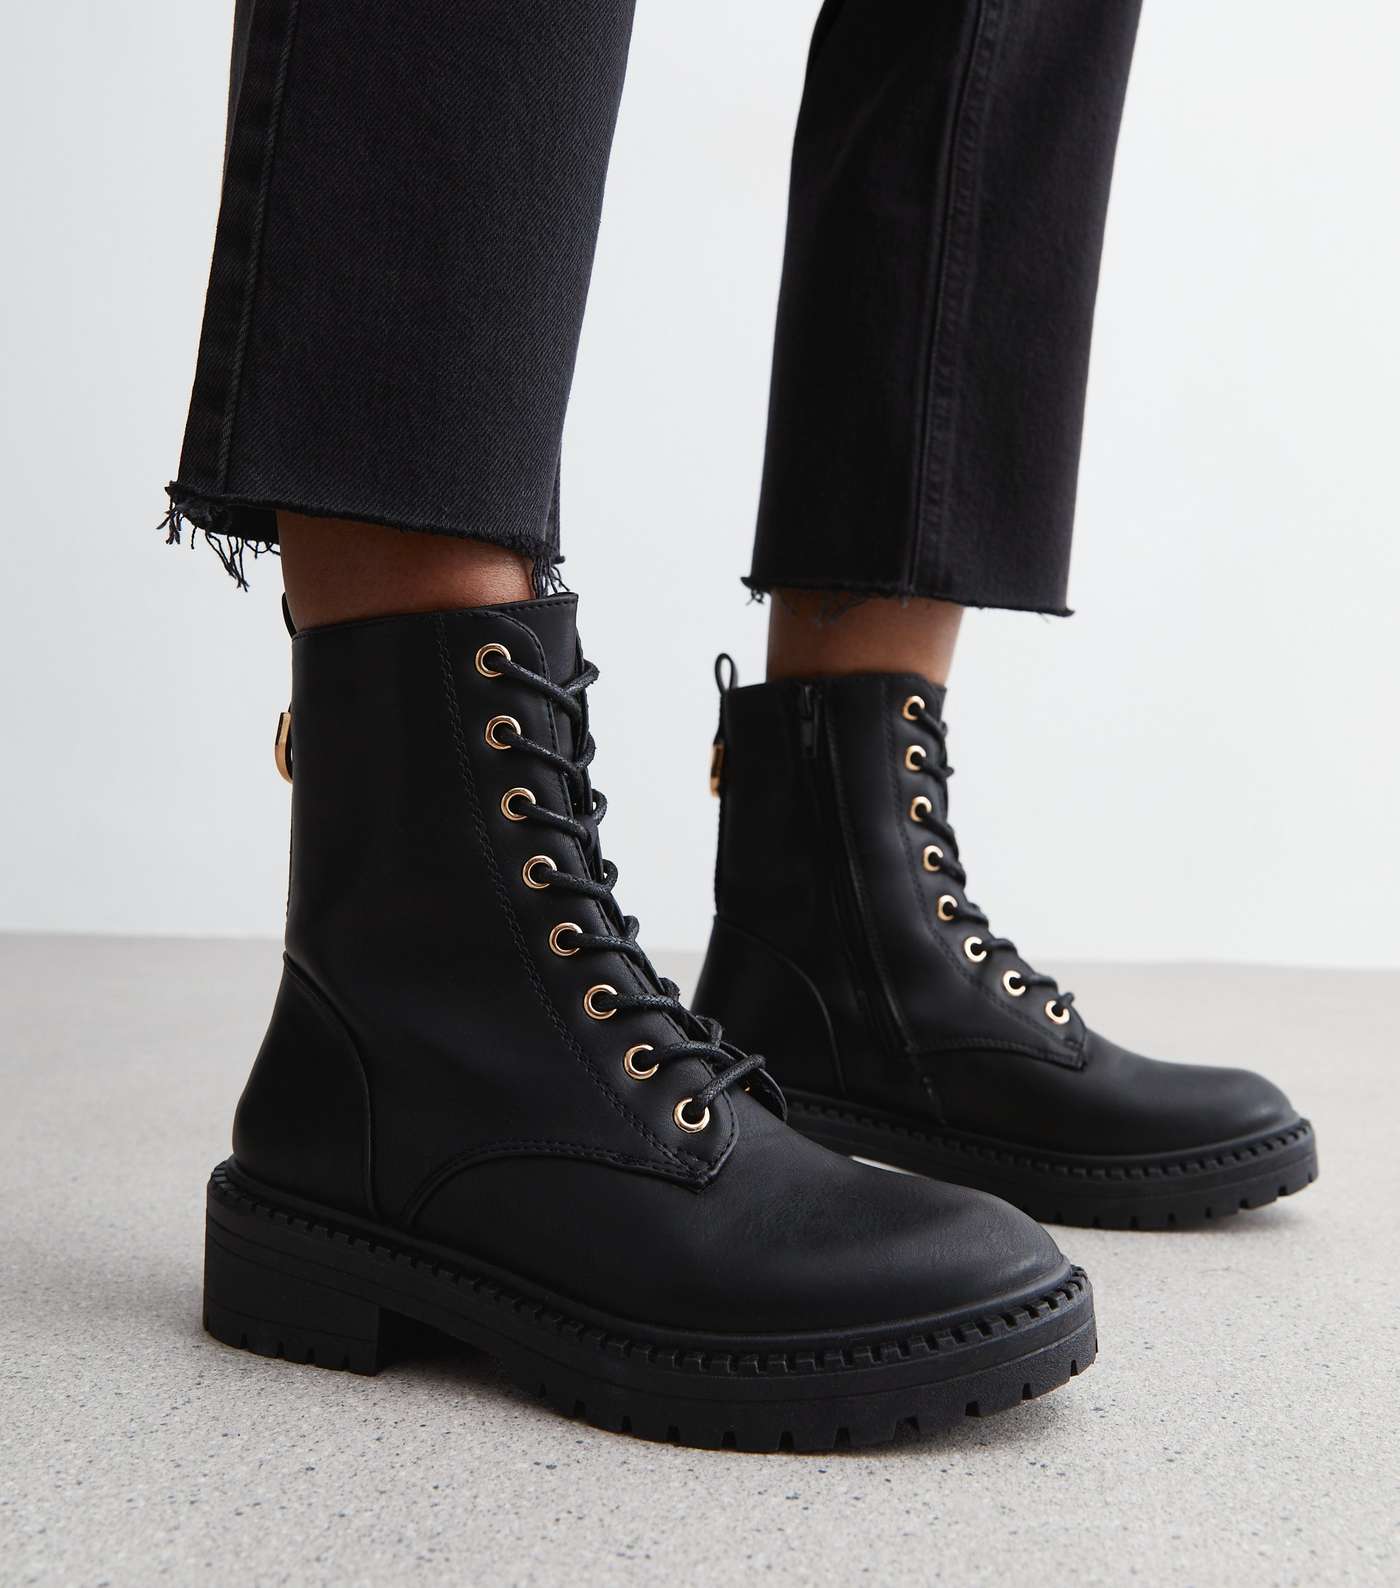 Black Leather-Look Lace Up Biker Boots Image 2